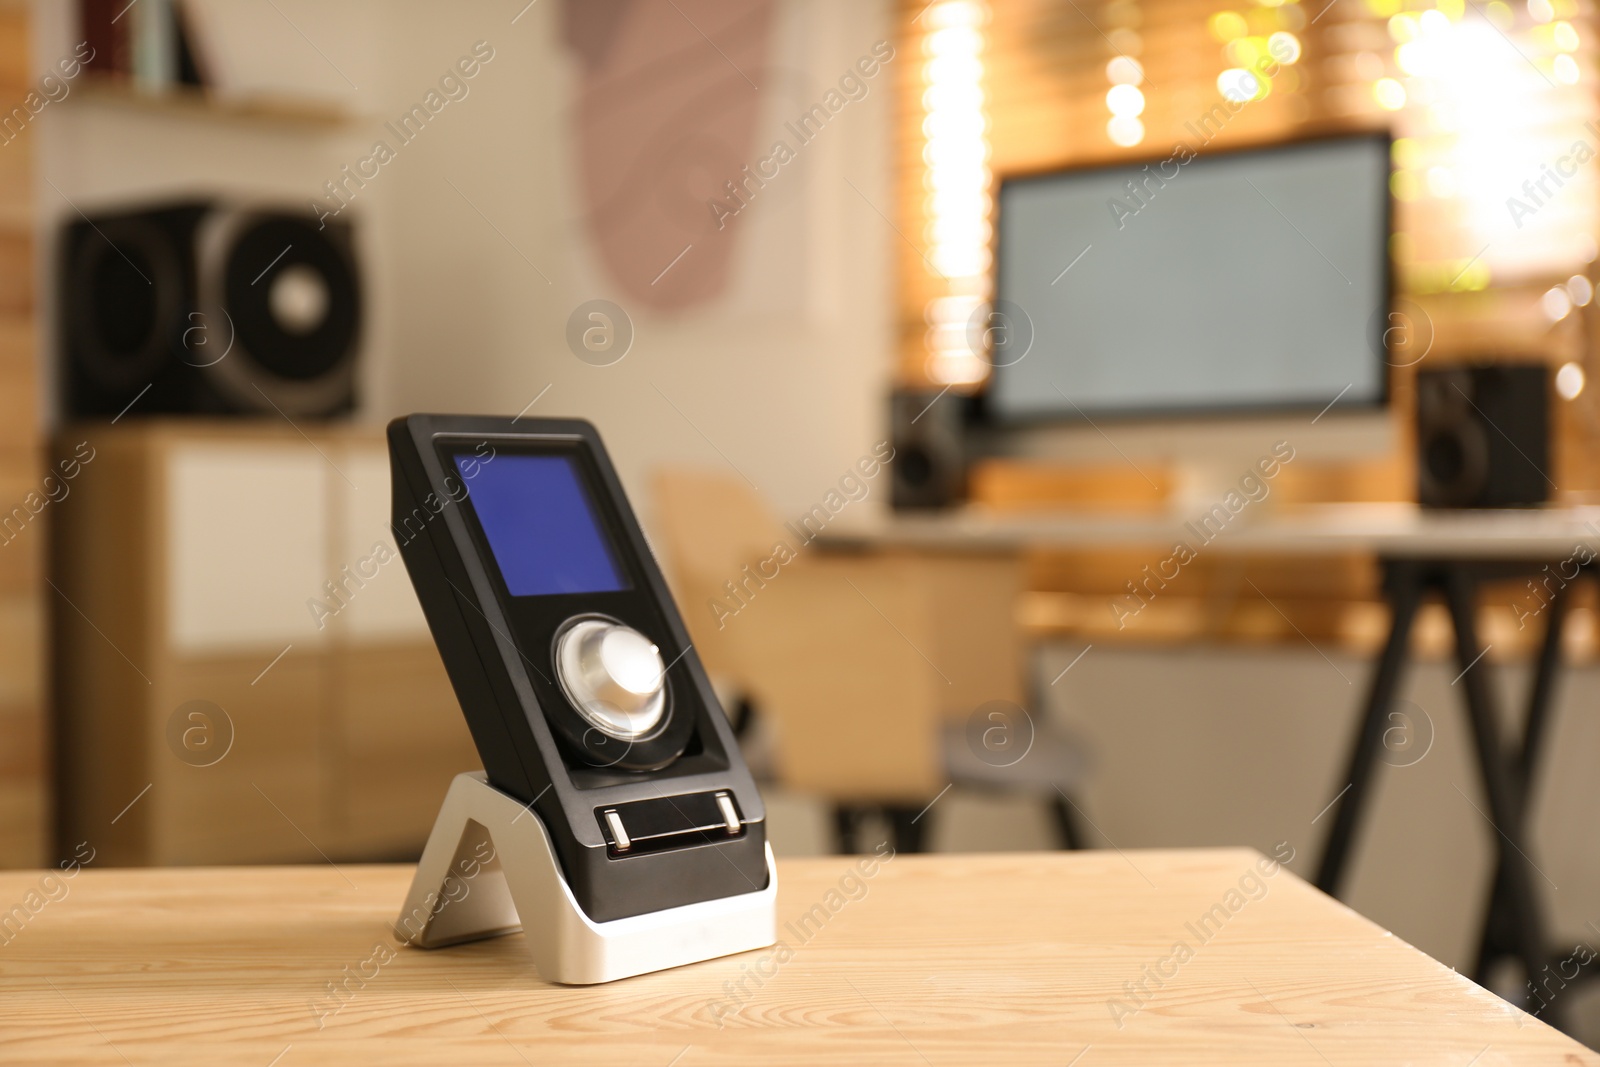 Photo of Remote control of audio speaker system on wooden table in room. Space for text